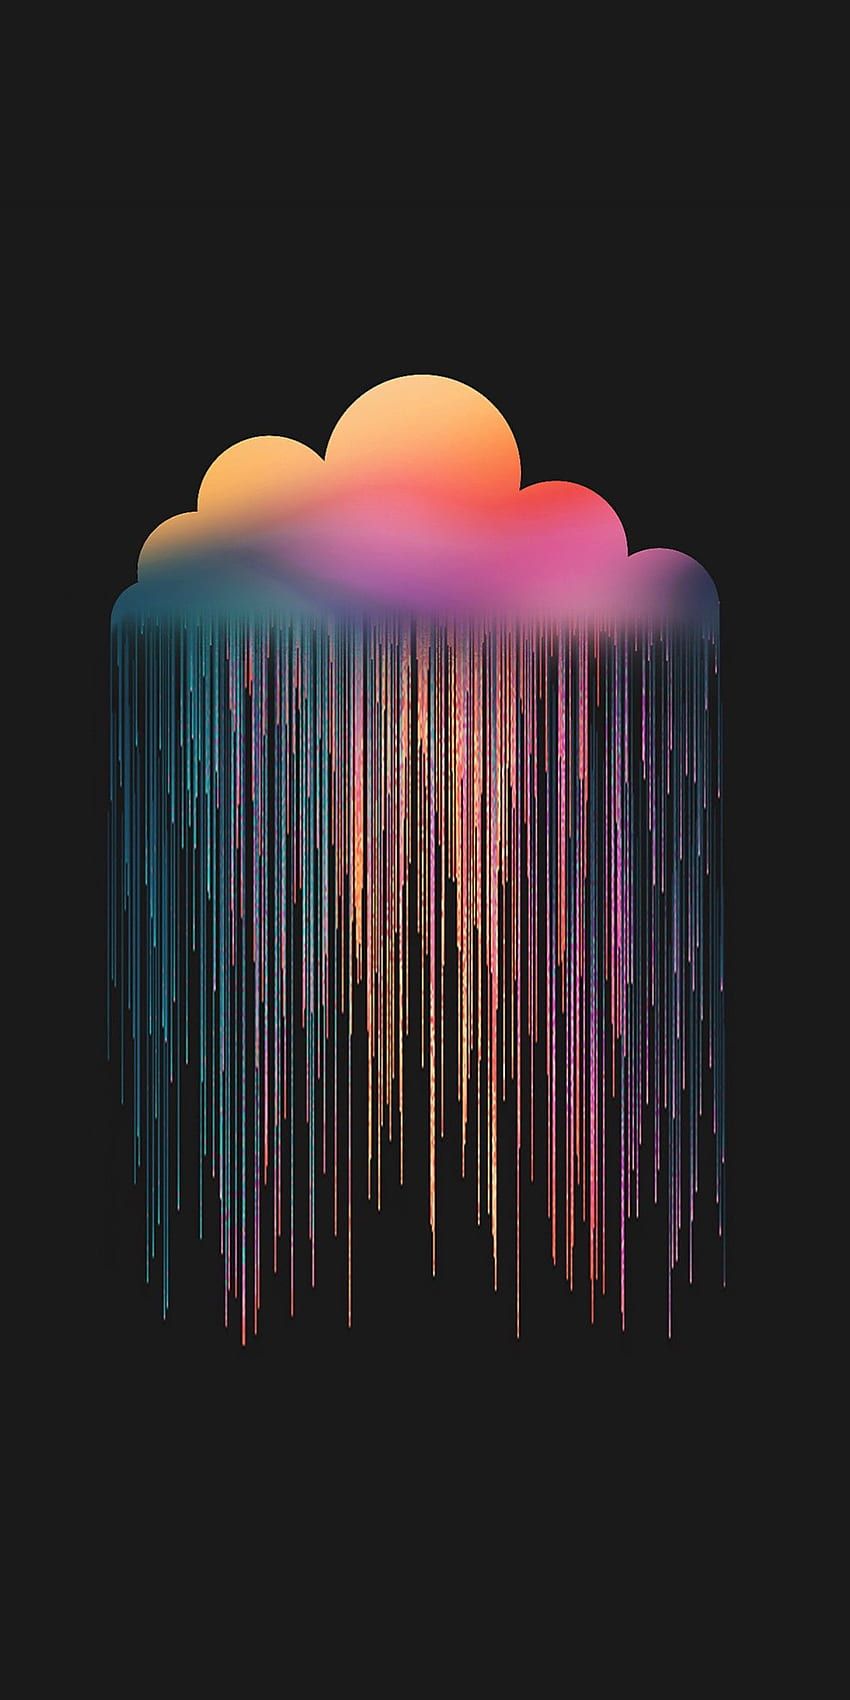 Colorful rain falling from the clouds wallpaper for iphone black background - Rainbows